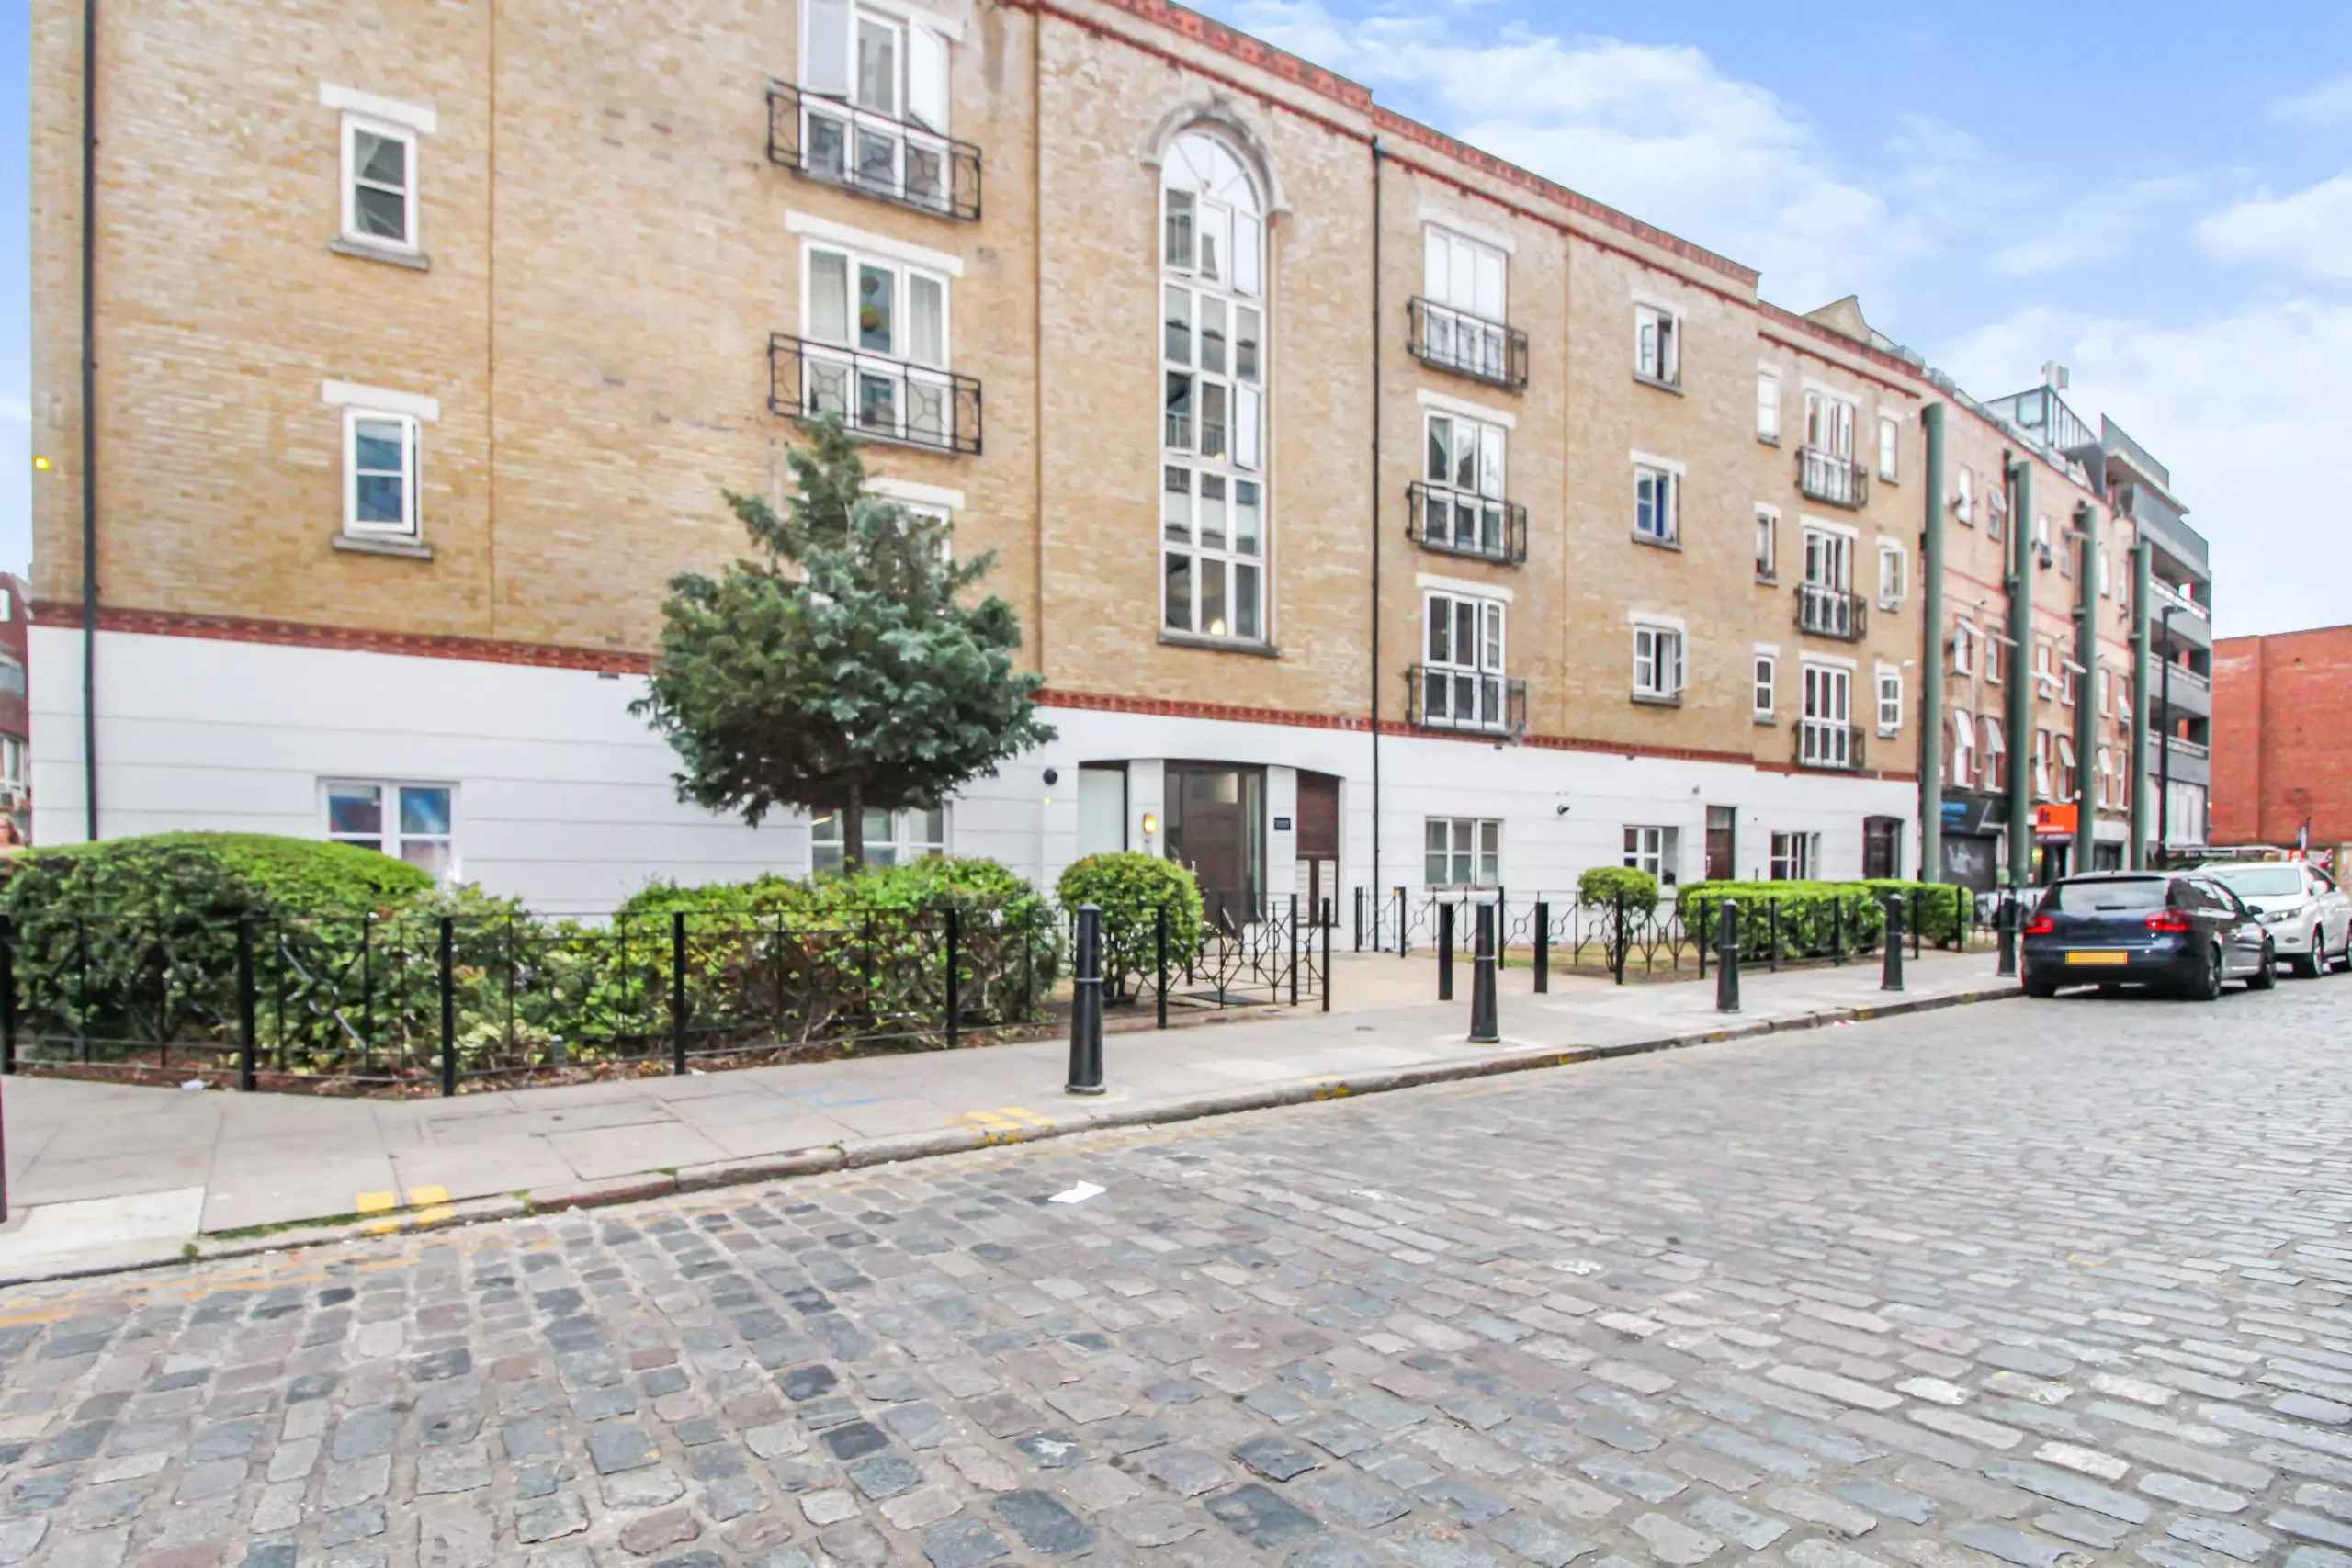 Two Bedroom Apartment In The Heart Of Whitechapel